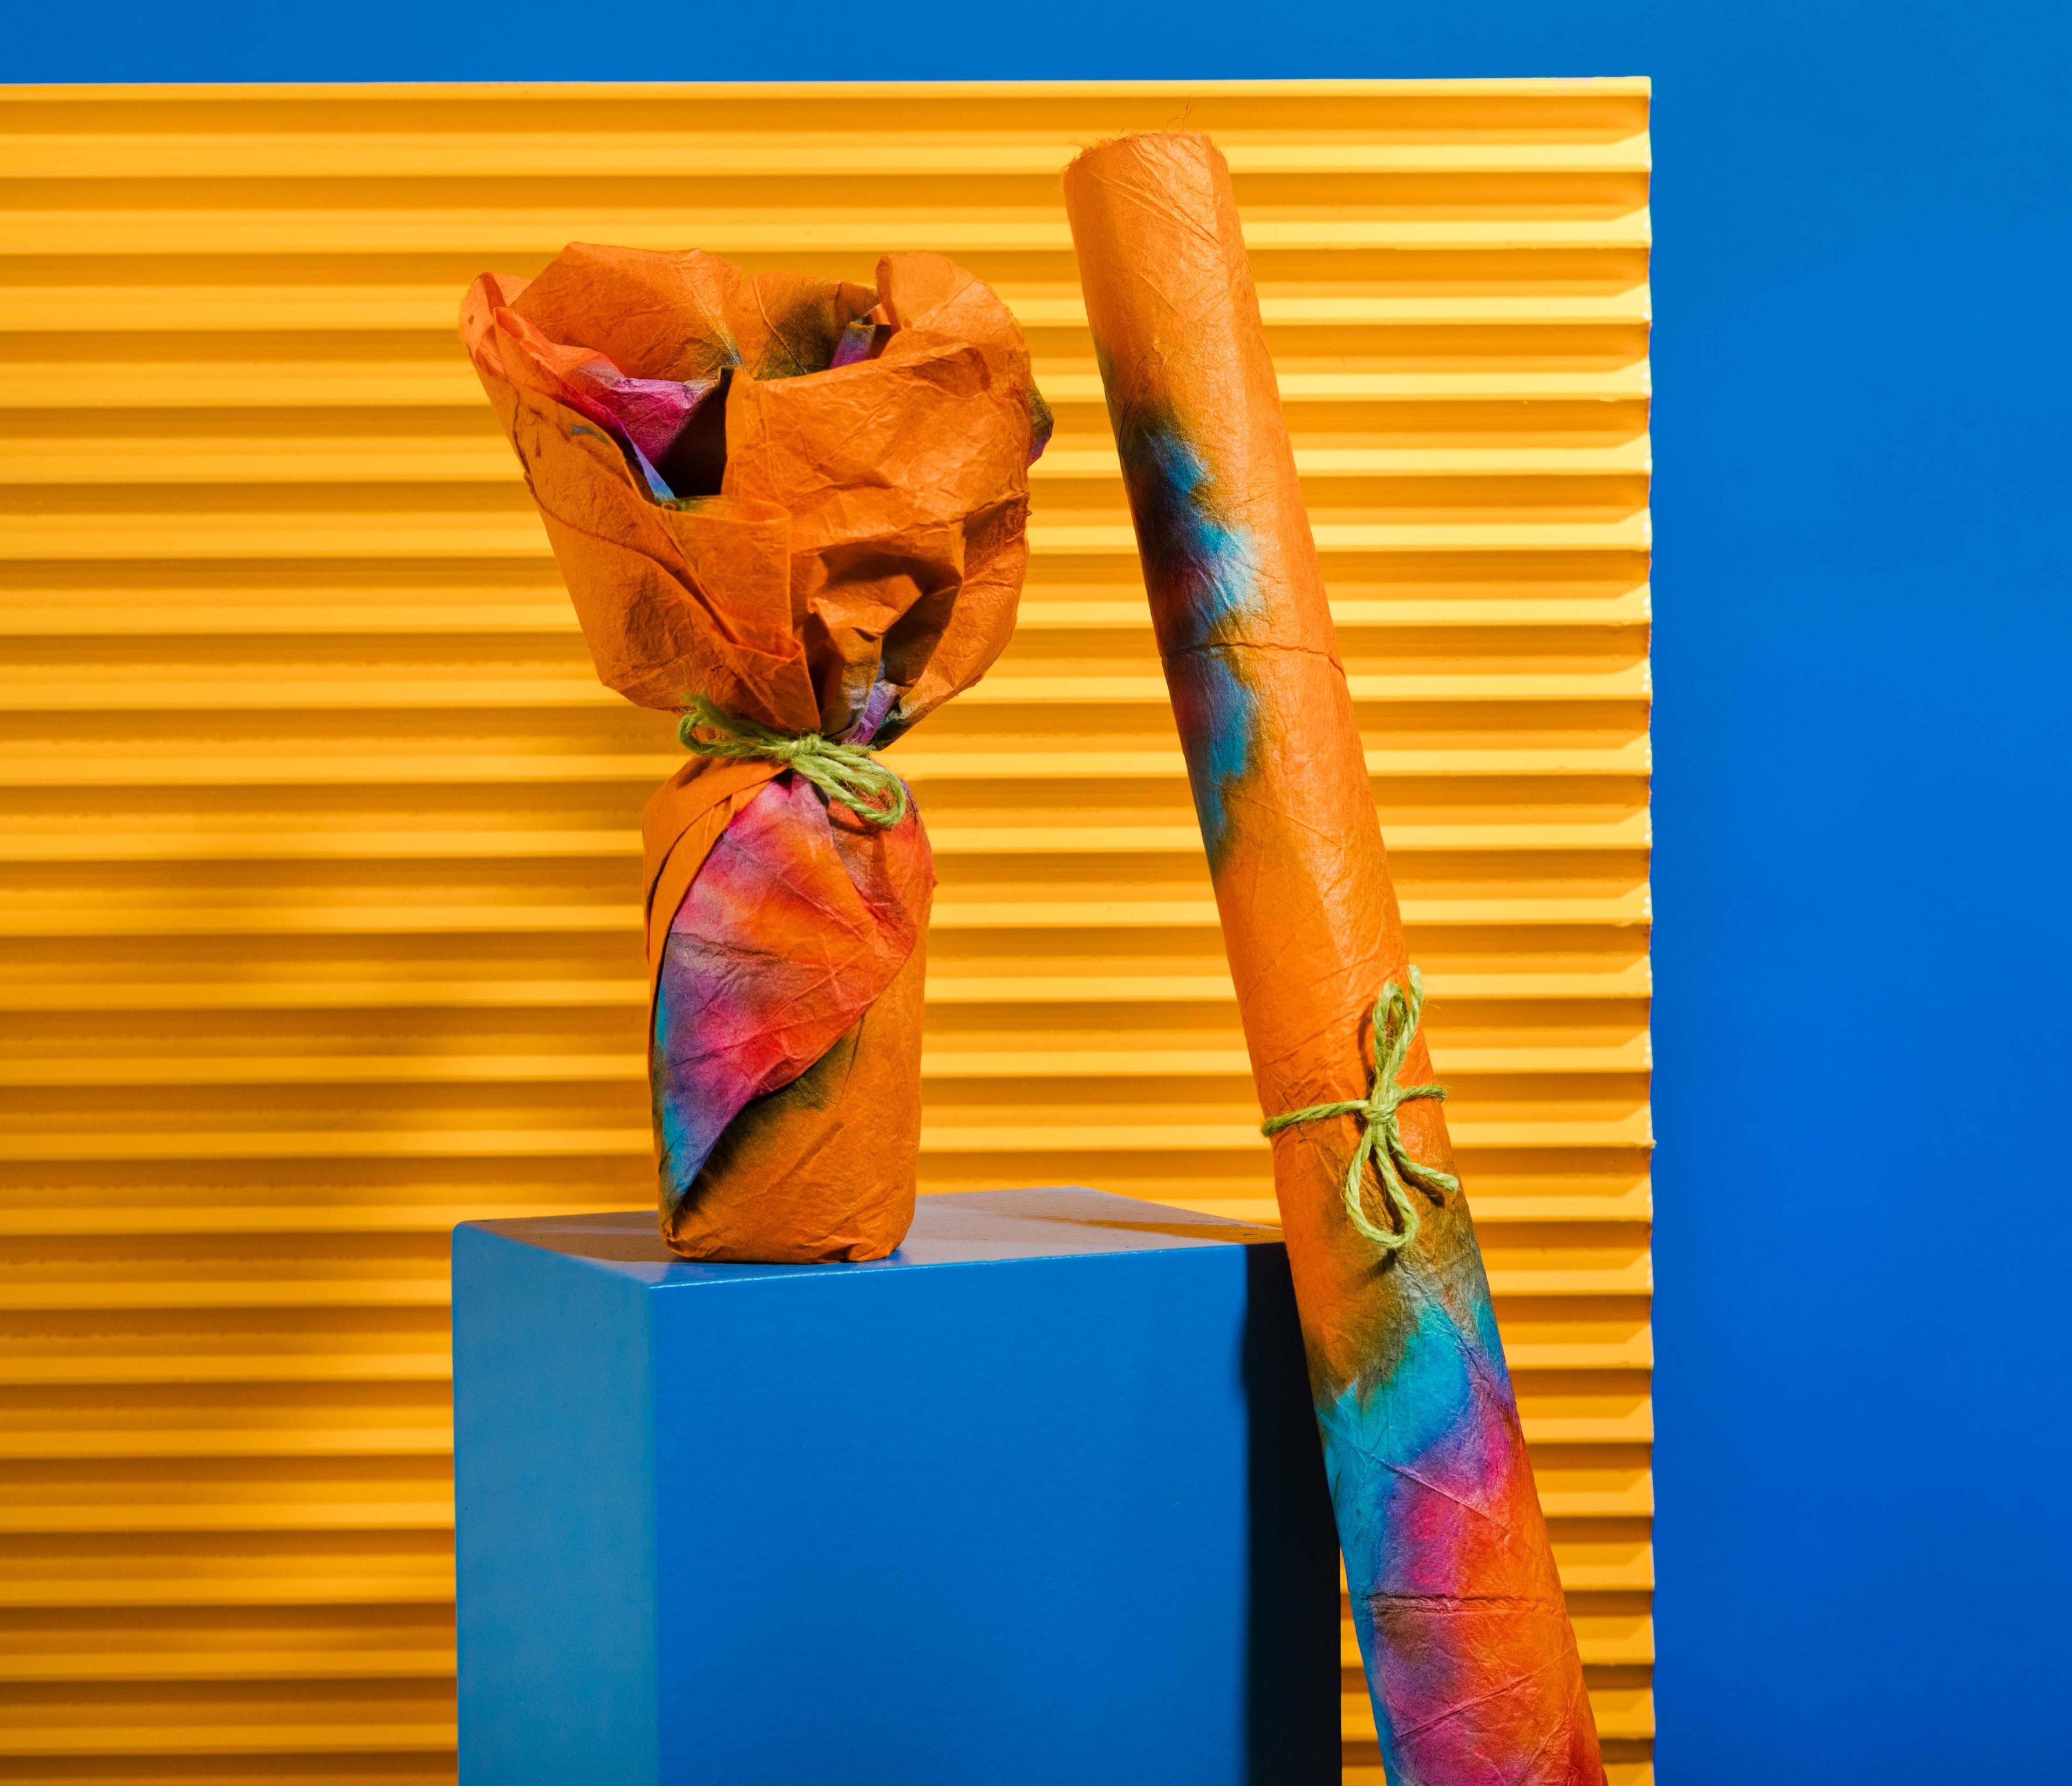 The Lokta paper is wrapped around a product, and rolled up and tied with string, on a blue plinth before an orange background.